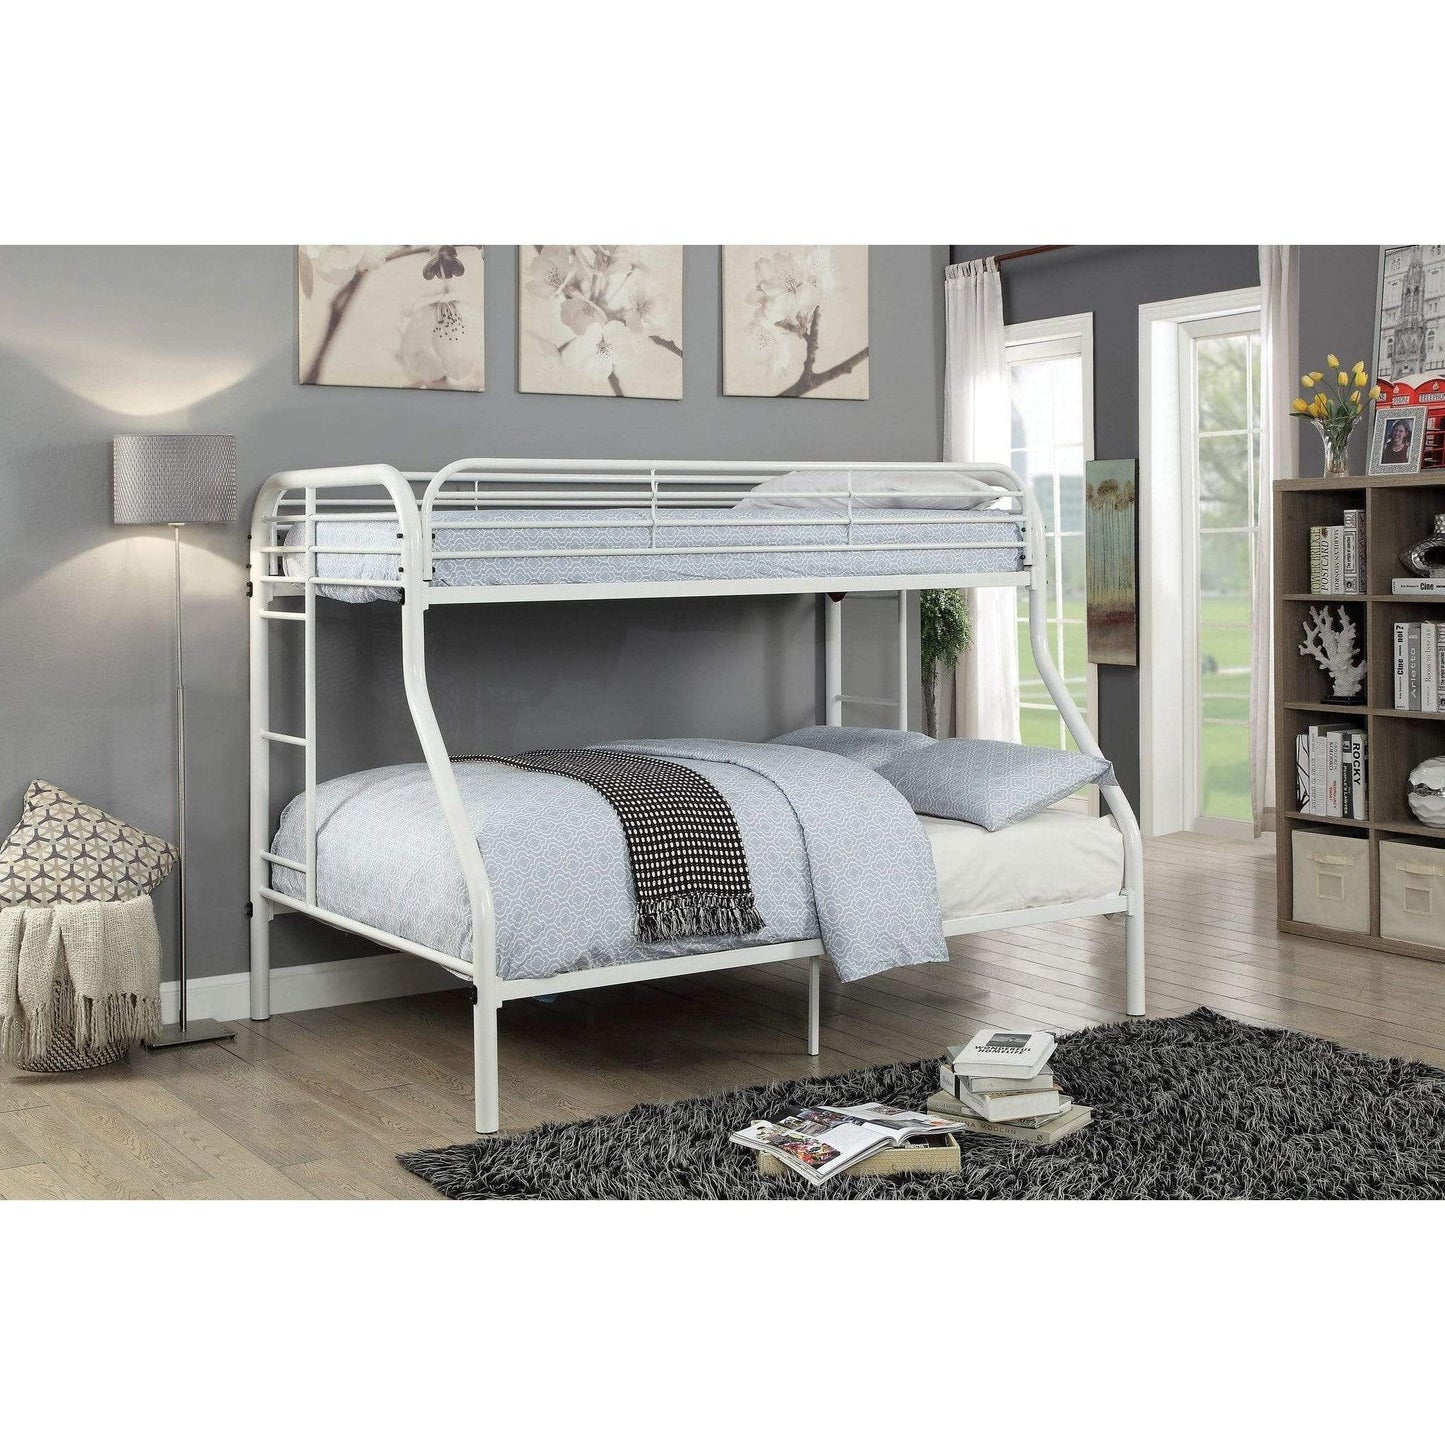 Furniture of America bunk bed twin / full white Langdon Contemporary Full / Full Bunk Bed